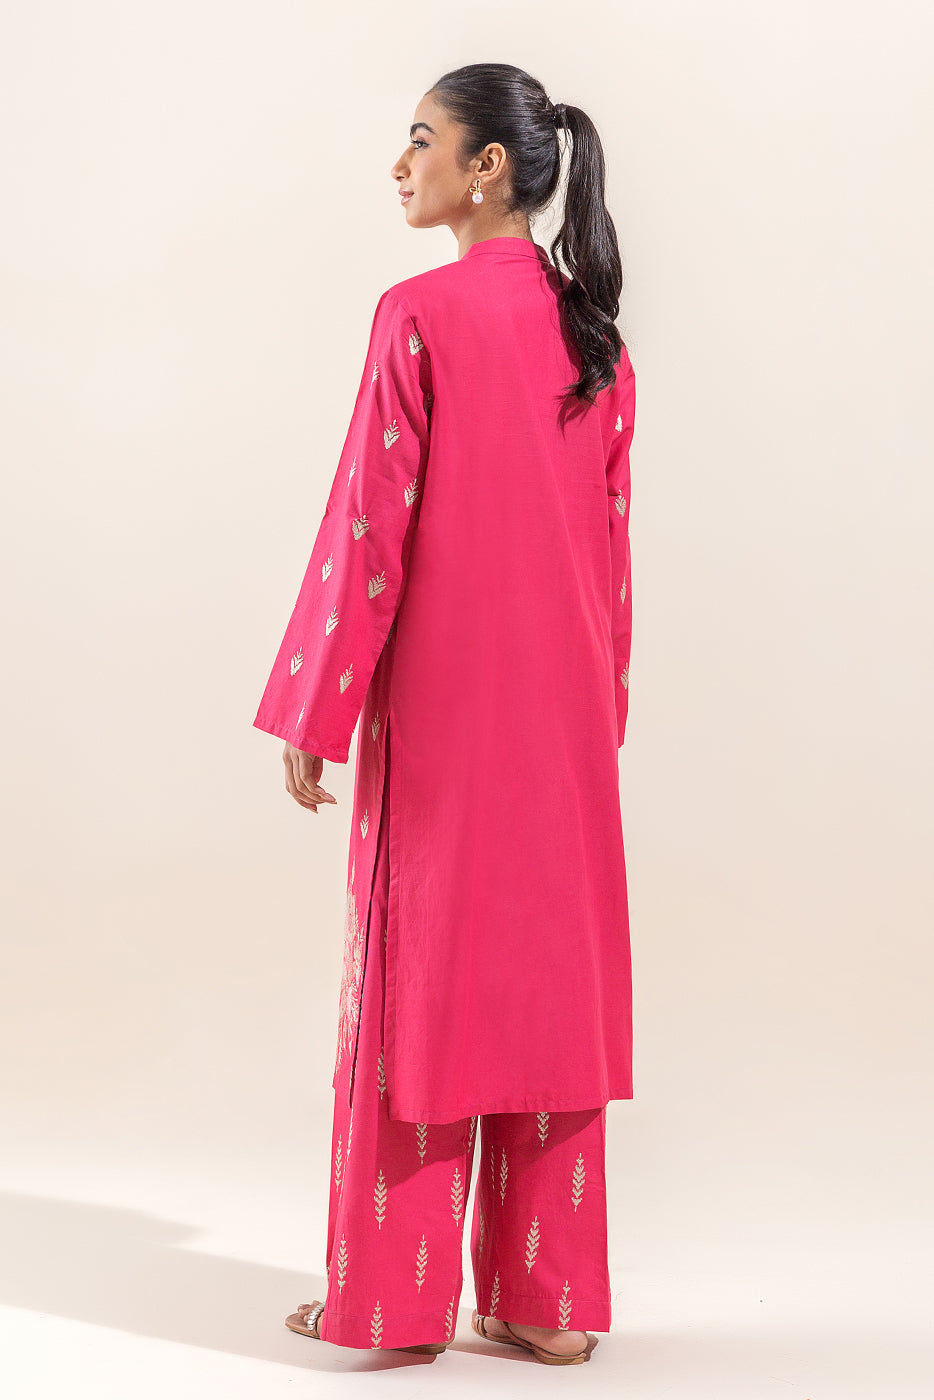 2 PIECE EMBROIDERED LAWN SUIT-PARADISE ROSE (UNSTITCHED)